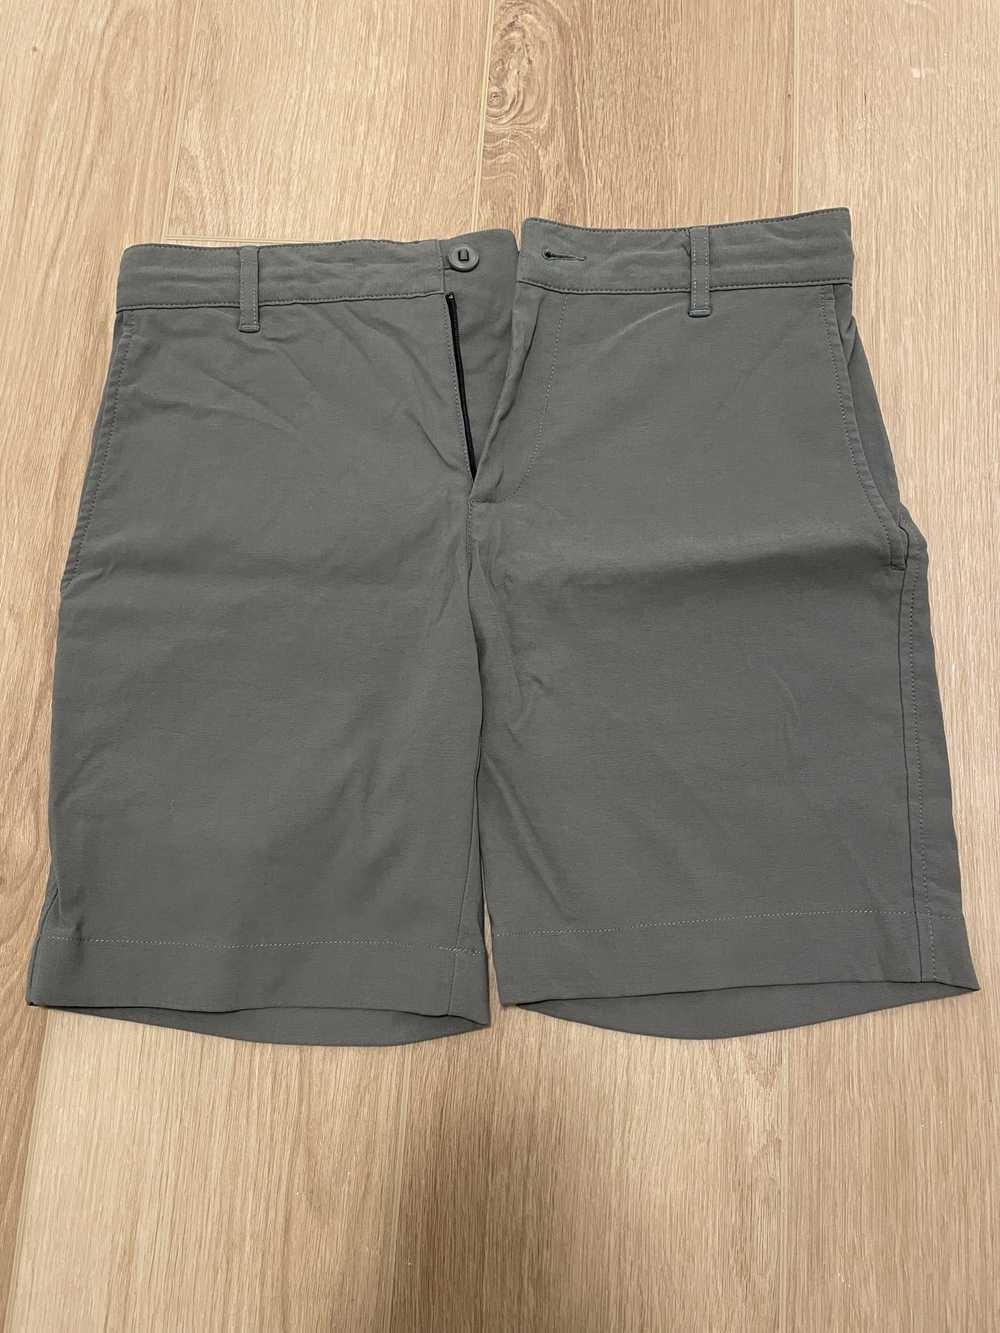 Outlier - New Way Shorts - image 2